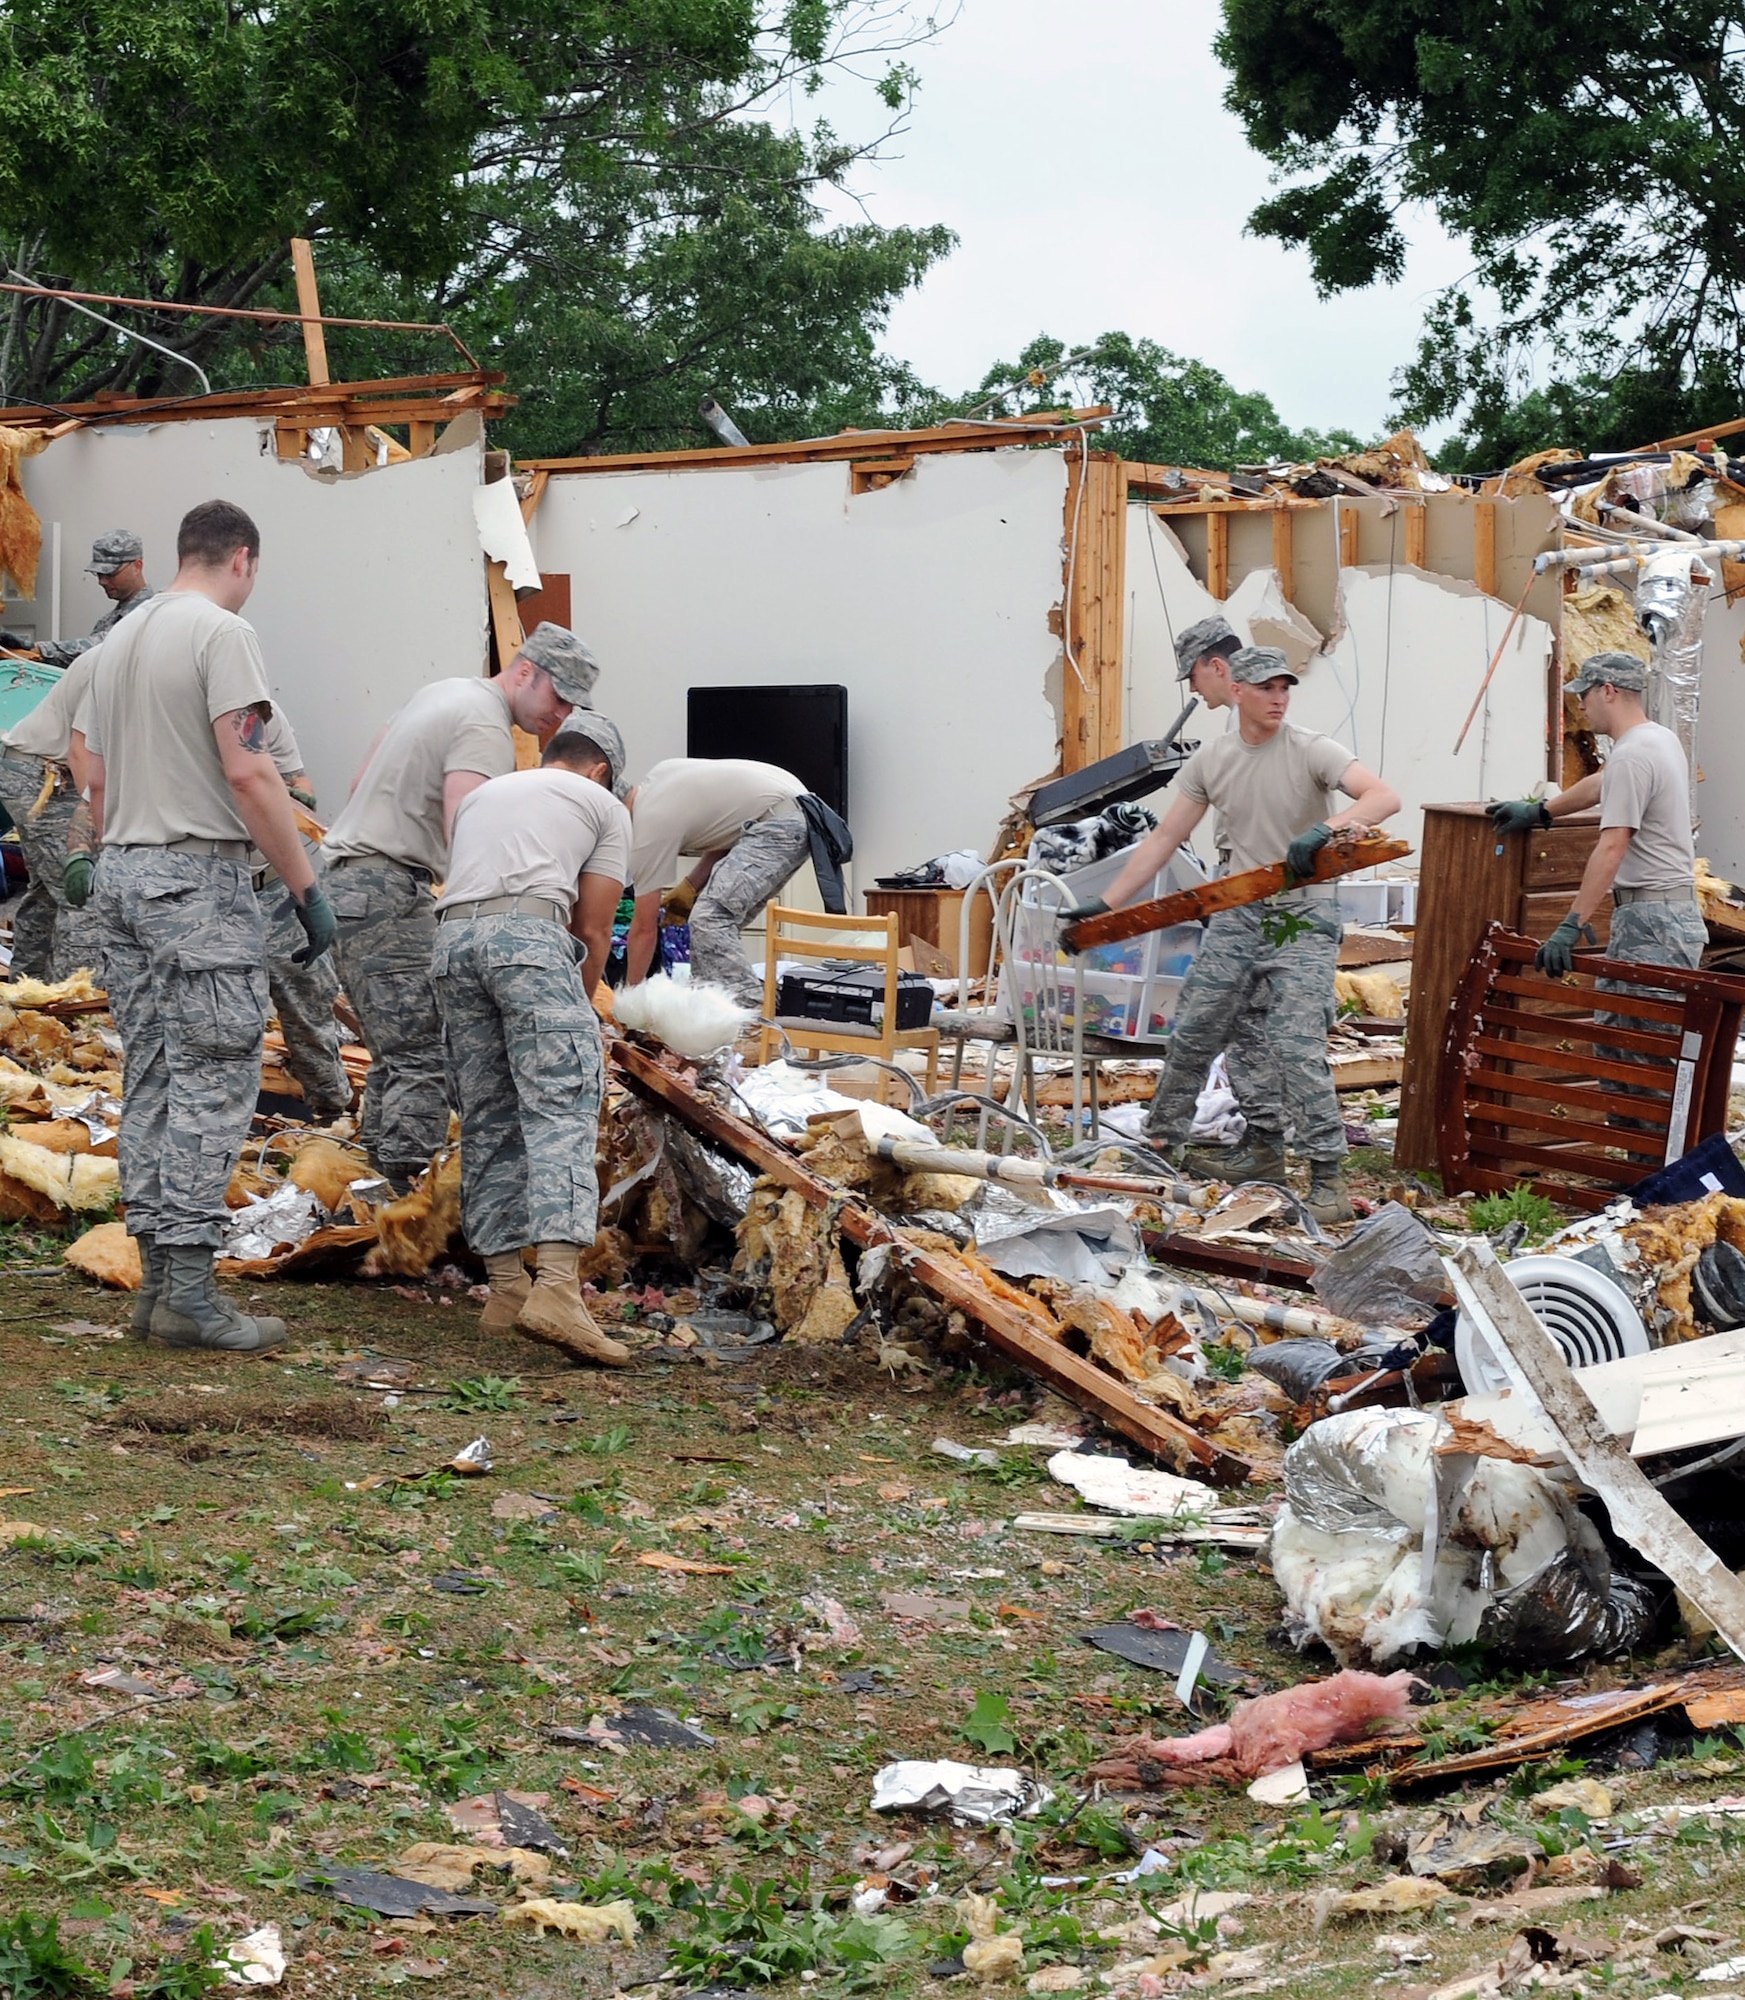 Airmen work together in an effort to clear debris April 26, 2011, at Little Rock Air Force Base, Ark., after a tornado struck the base at approximately 8 p.m. April 25. Little Rock AFB sustained significant damage to base housing, the base exchange, fire department and buildings along the flightline. (U. S. Air Force photo by Airman 1st Class Ellora Stewart)